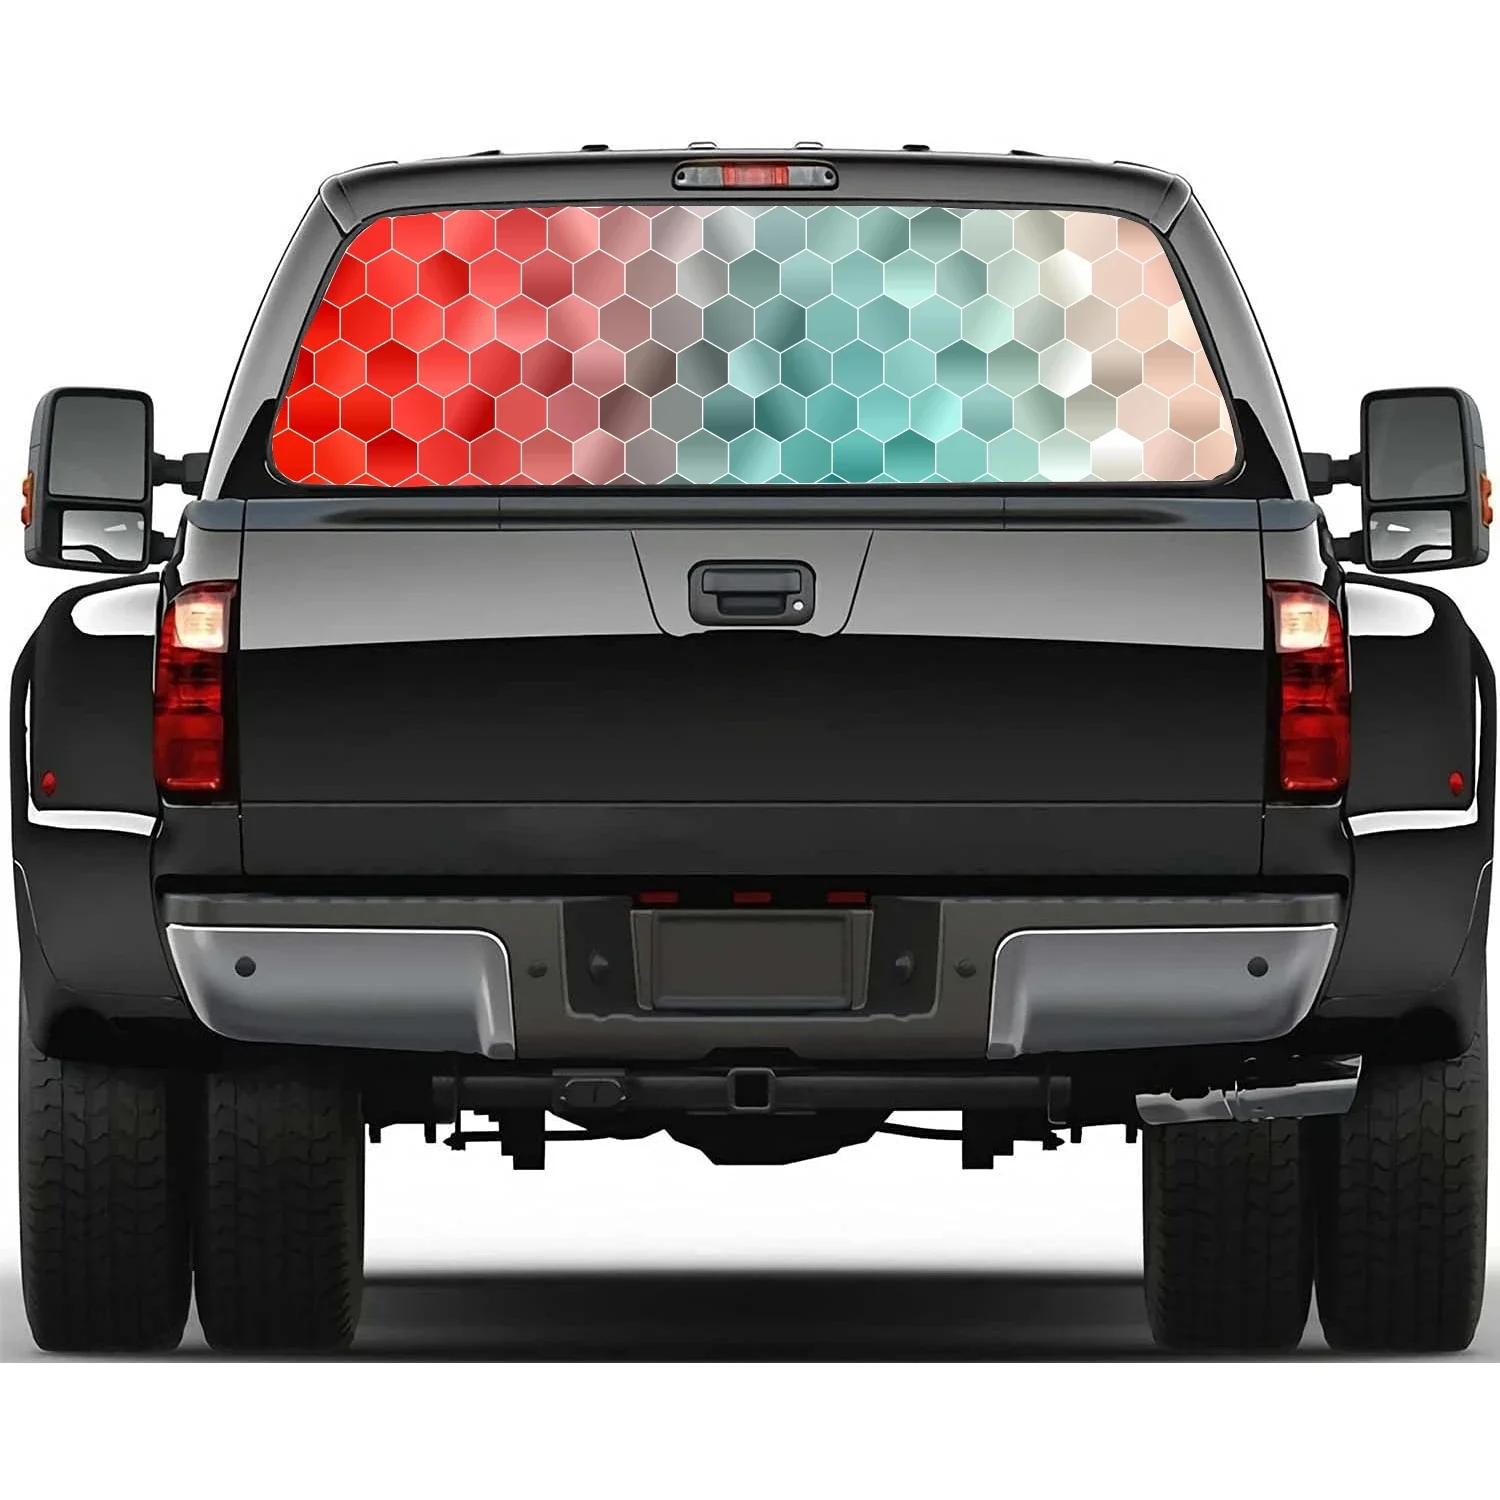 

Abstract Stripped Hexagon Rear Window Decal Fit Pickup,Truck,Car Universal See Through Perforated Back Windows Vinyl Sticker